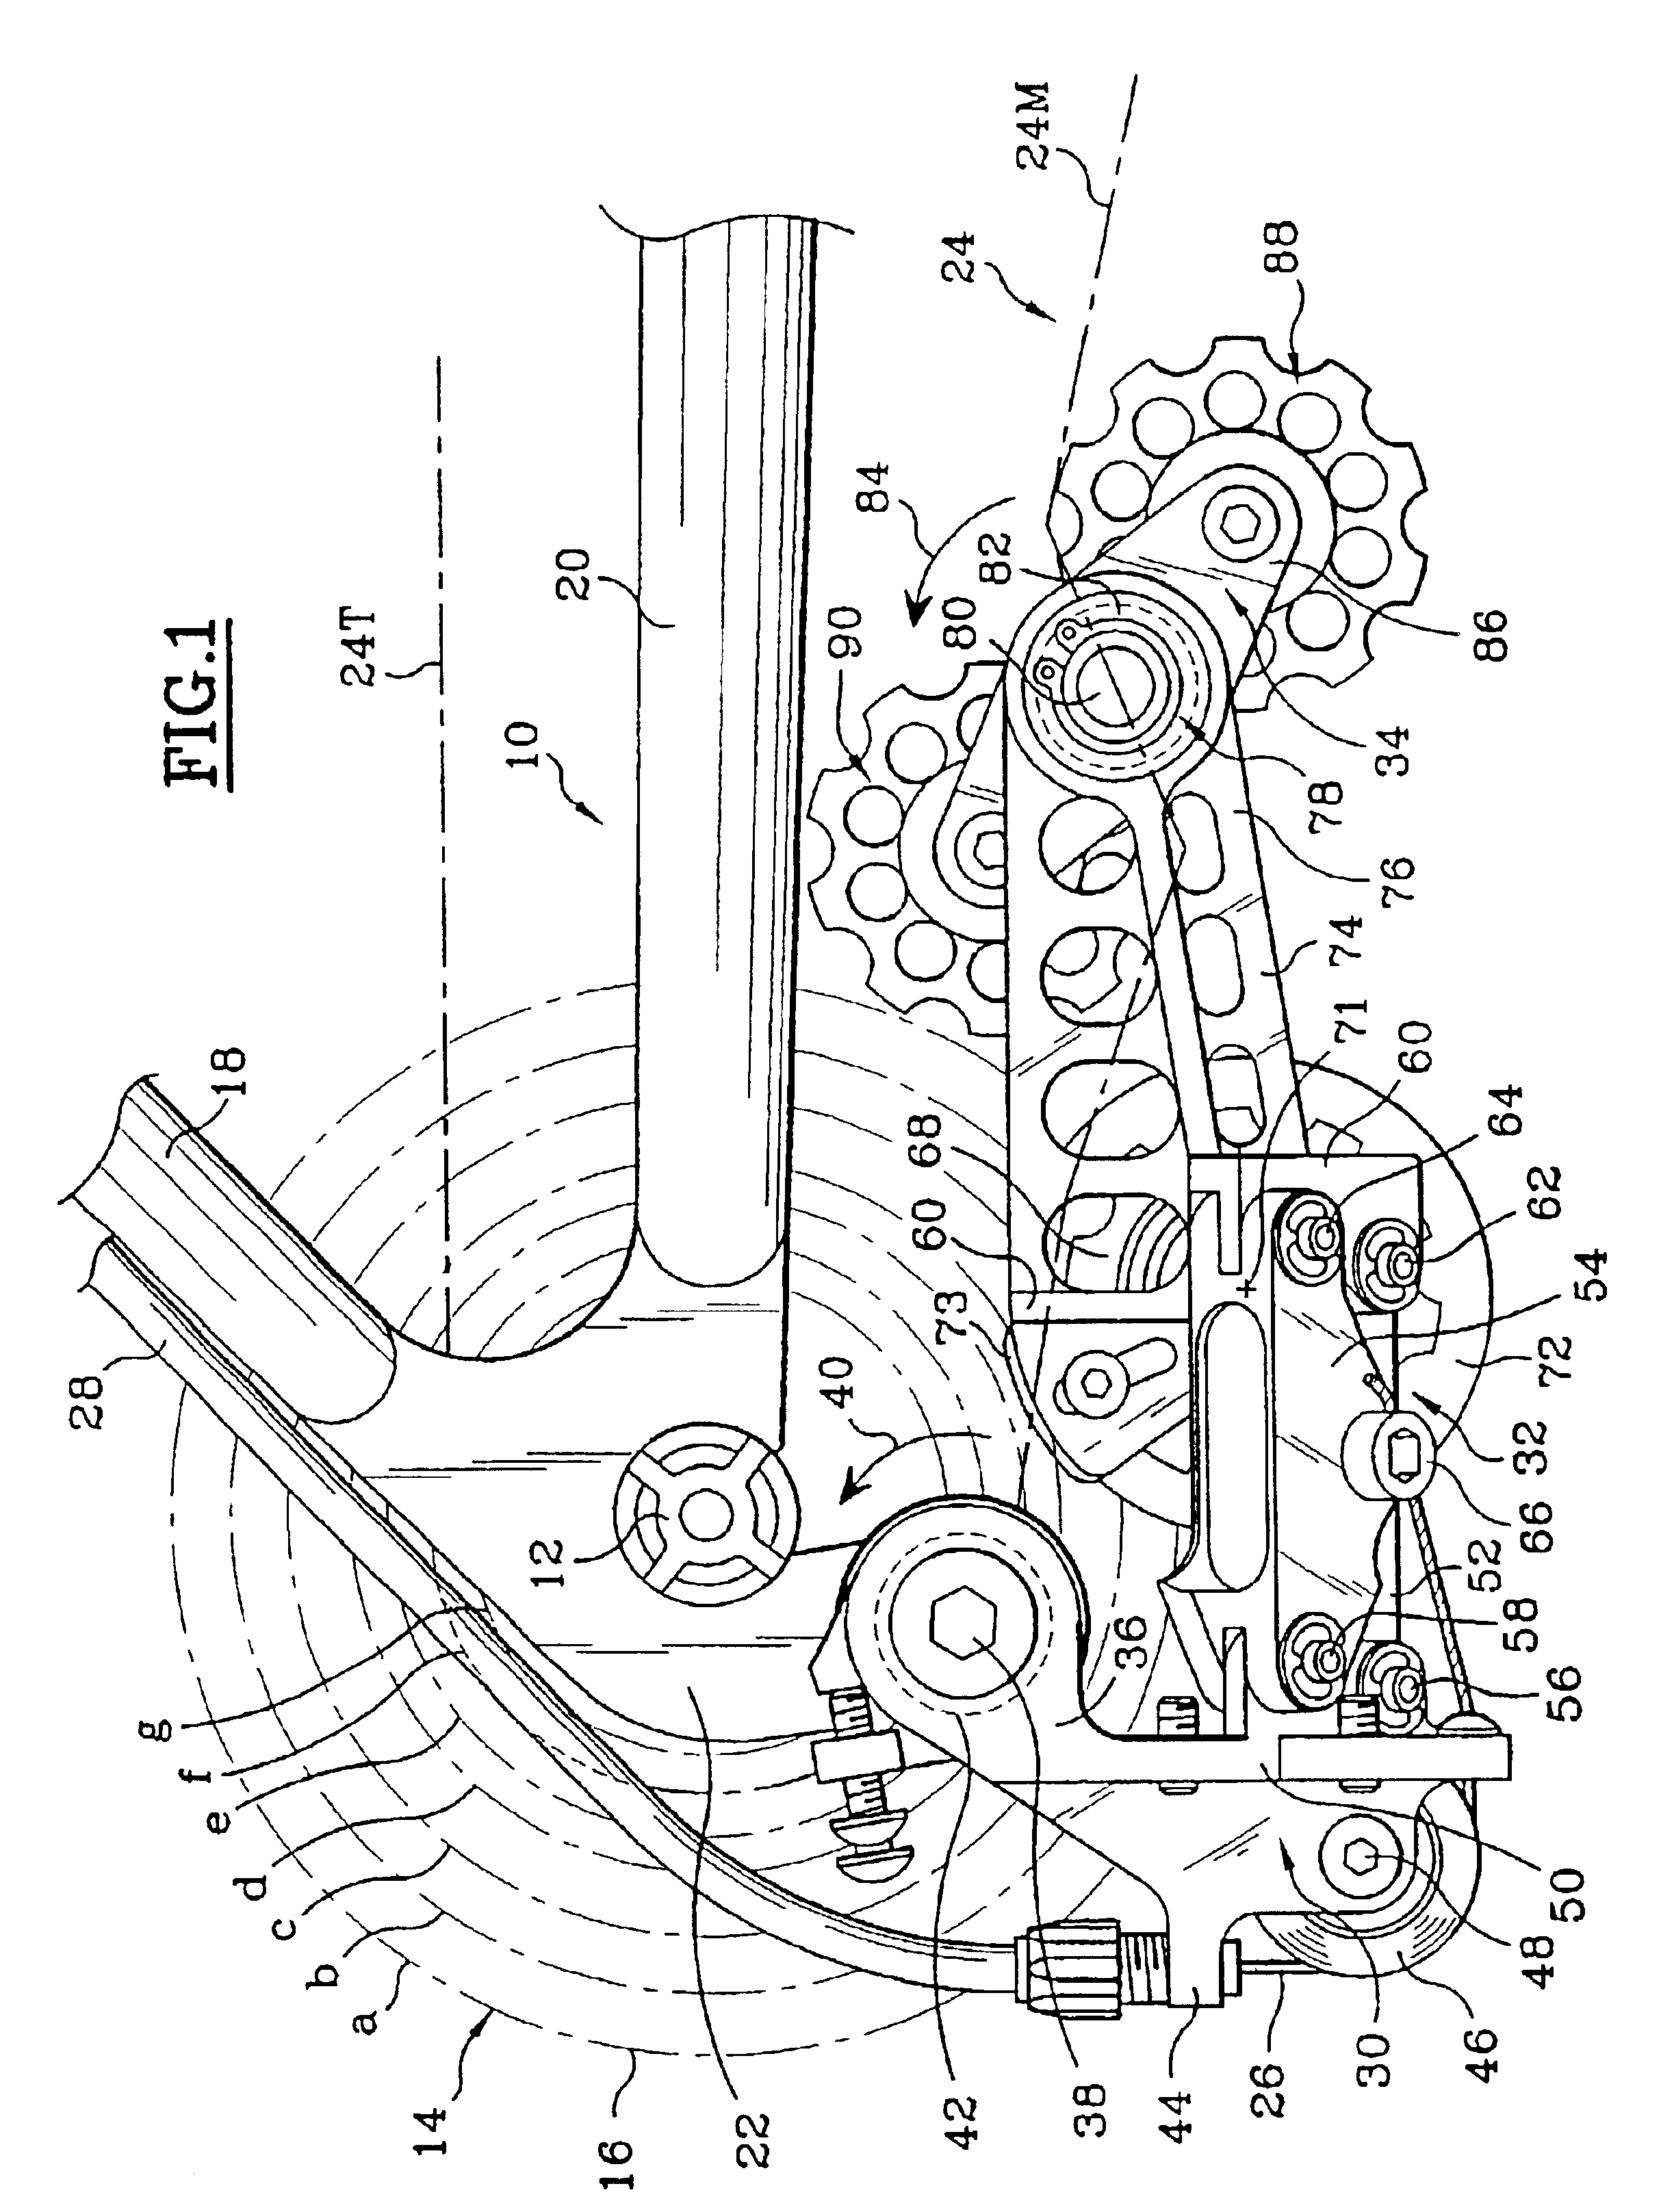 Rear derailleur device for a bicycle